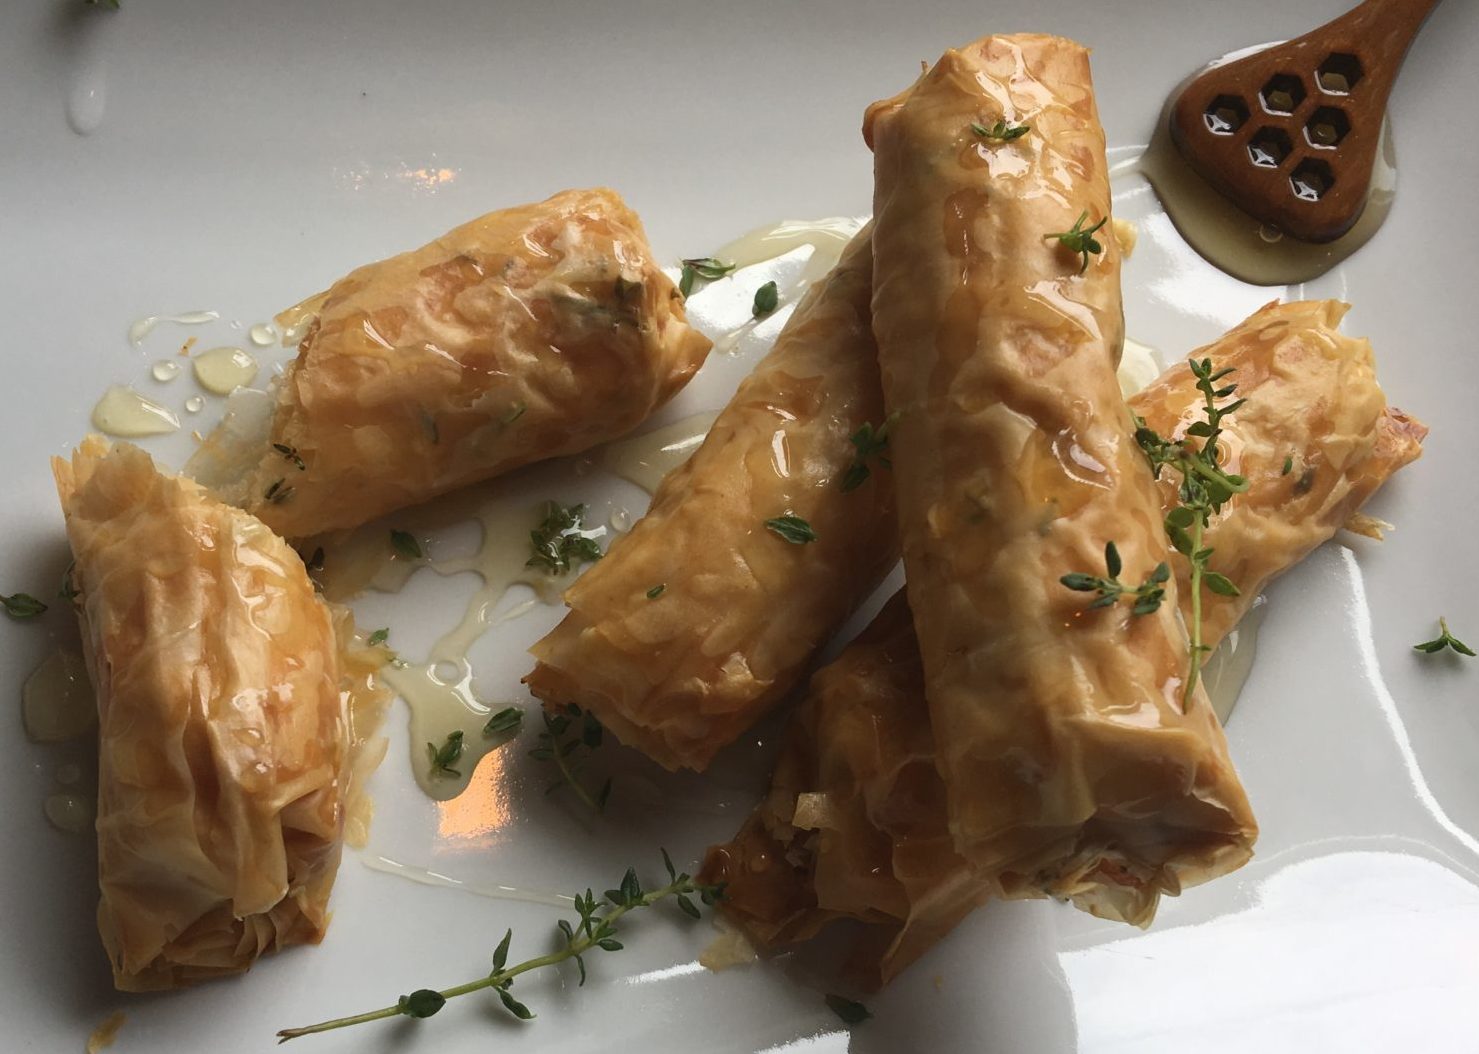 Goat Cheese Baked in Filo with Thyme